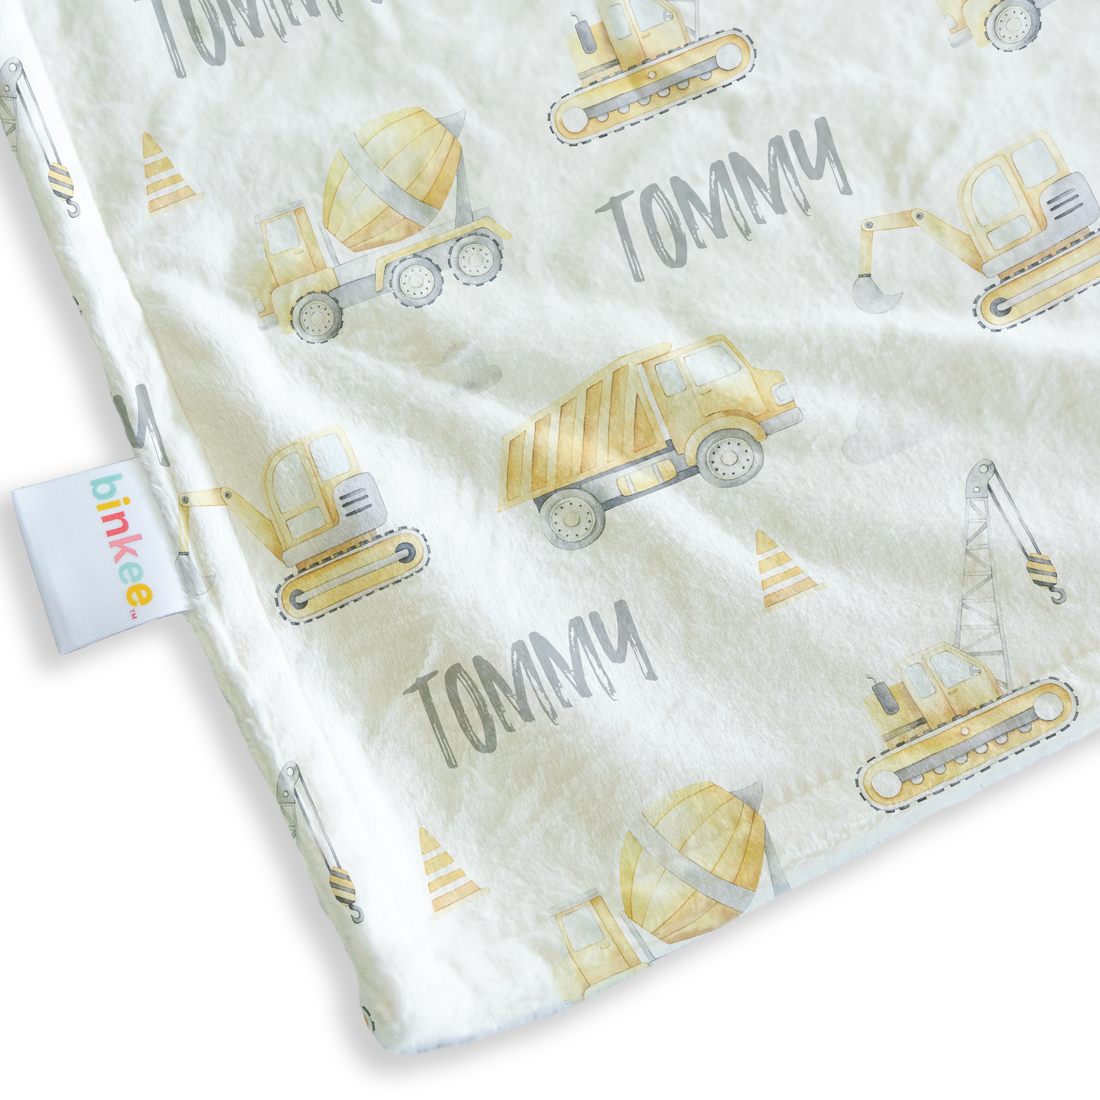 Construction (Grey) - Personalised Minky Blanket